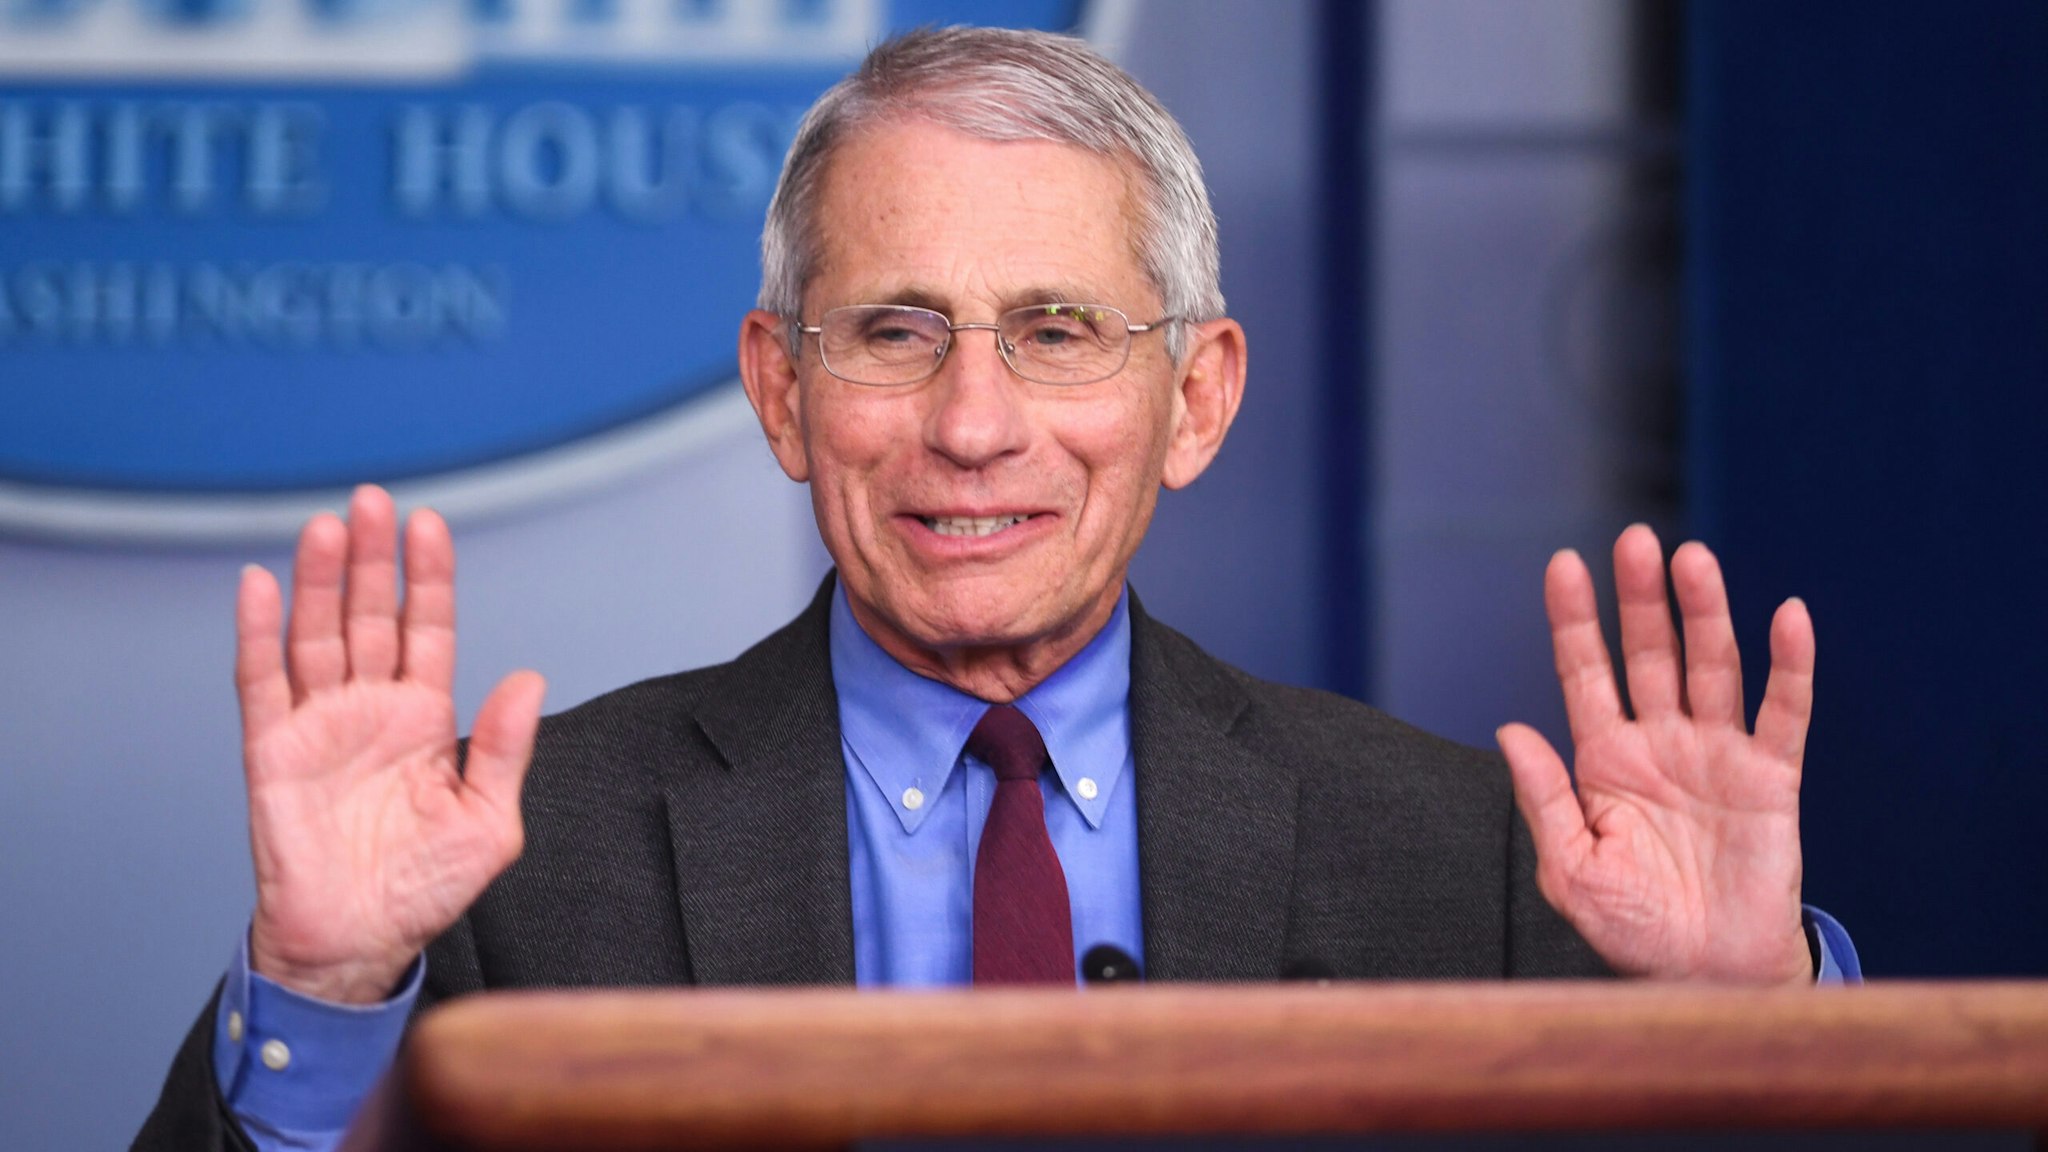 Anthony Fauci, director of the National Institute of Allergy and Infectious Diseases, speaks during a Coronavirus Task Force news conference at the White House in Washington, D.C., U.S., on Friday, April 10, 2020. President Donald Trump said he has asked his agriculture secretary to use all of the funds and authorities at his disposal, to aid U.S. farmers, whose financial peril has worsened in the coronavirus pandemic.